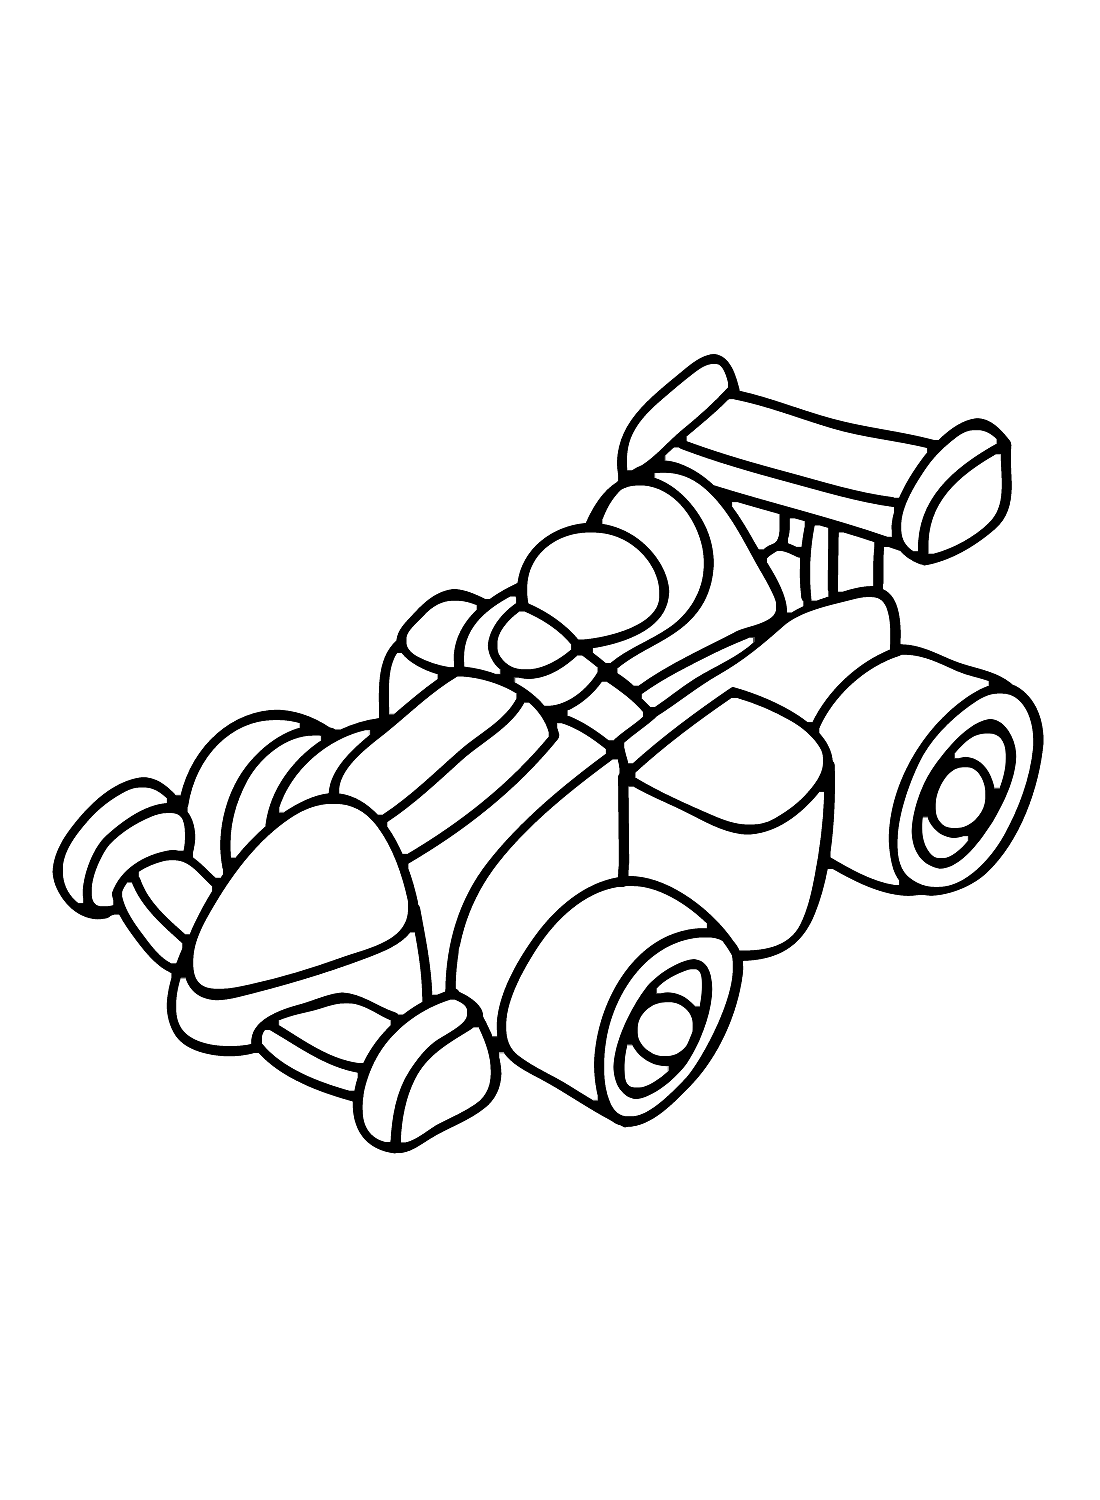 Toys Coloring Pages Printable for Free Download